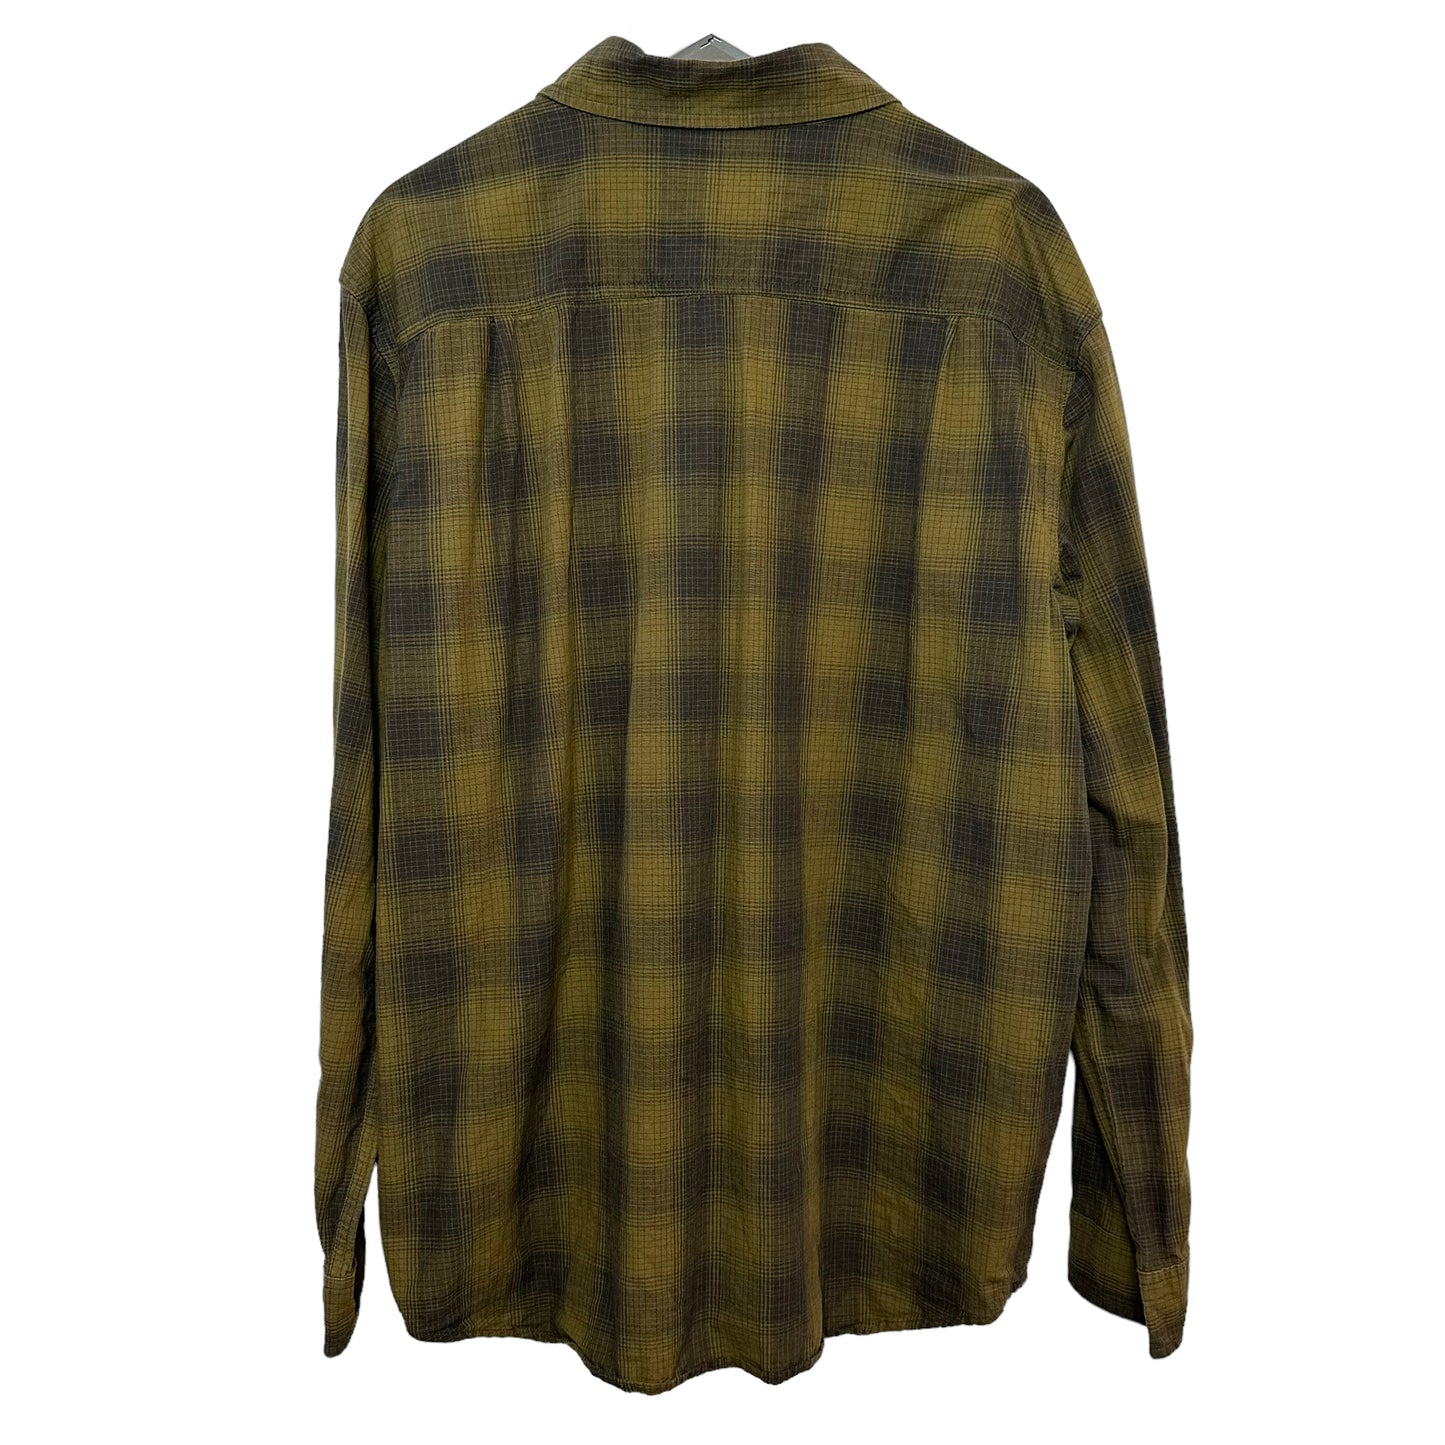 Carhartt Relaxed Fit Green Plaid Long Sleeve Button Down Shirt Large